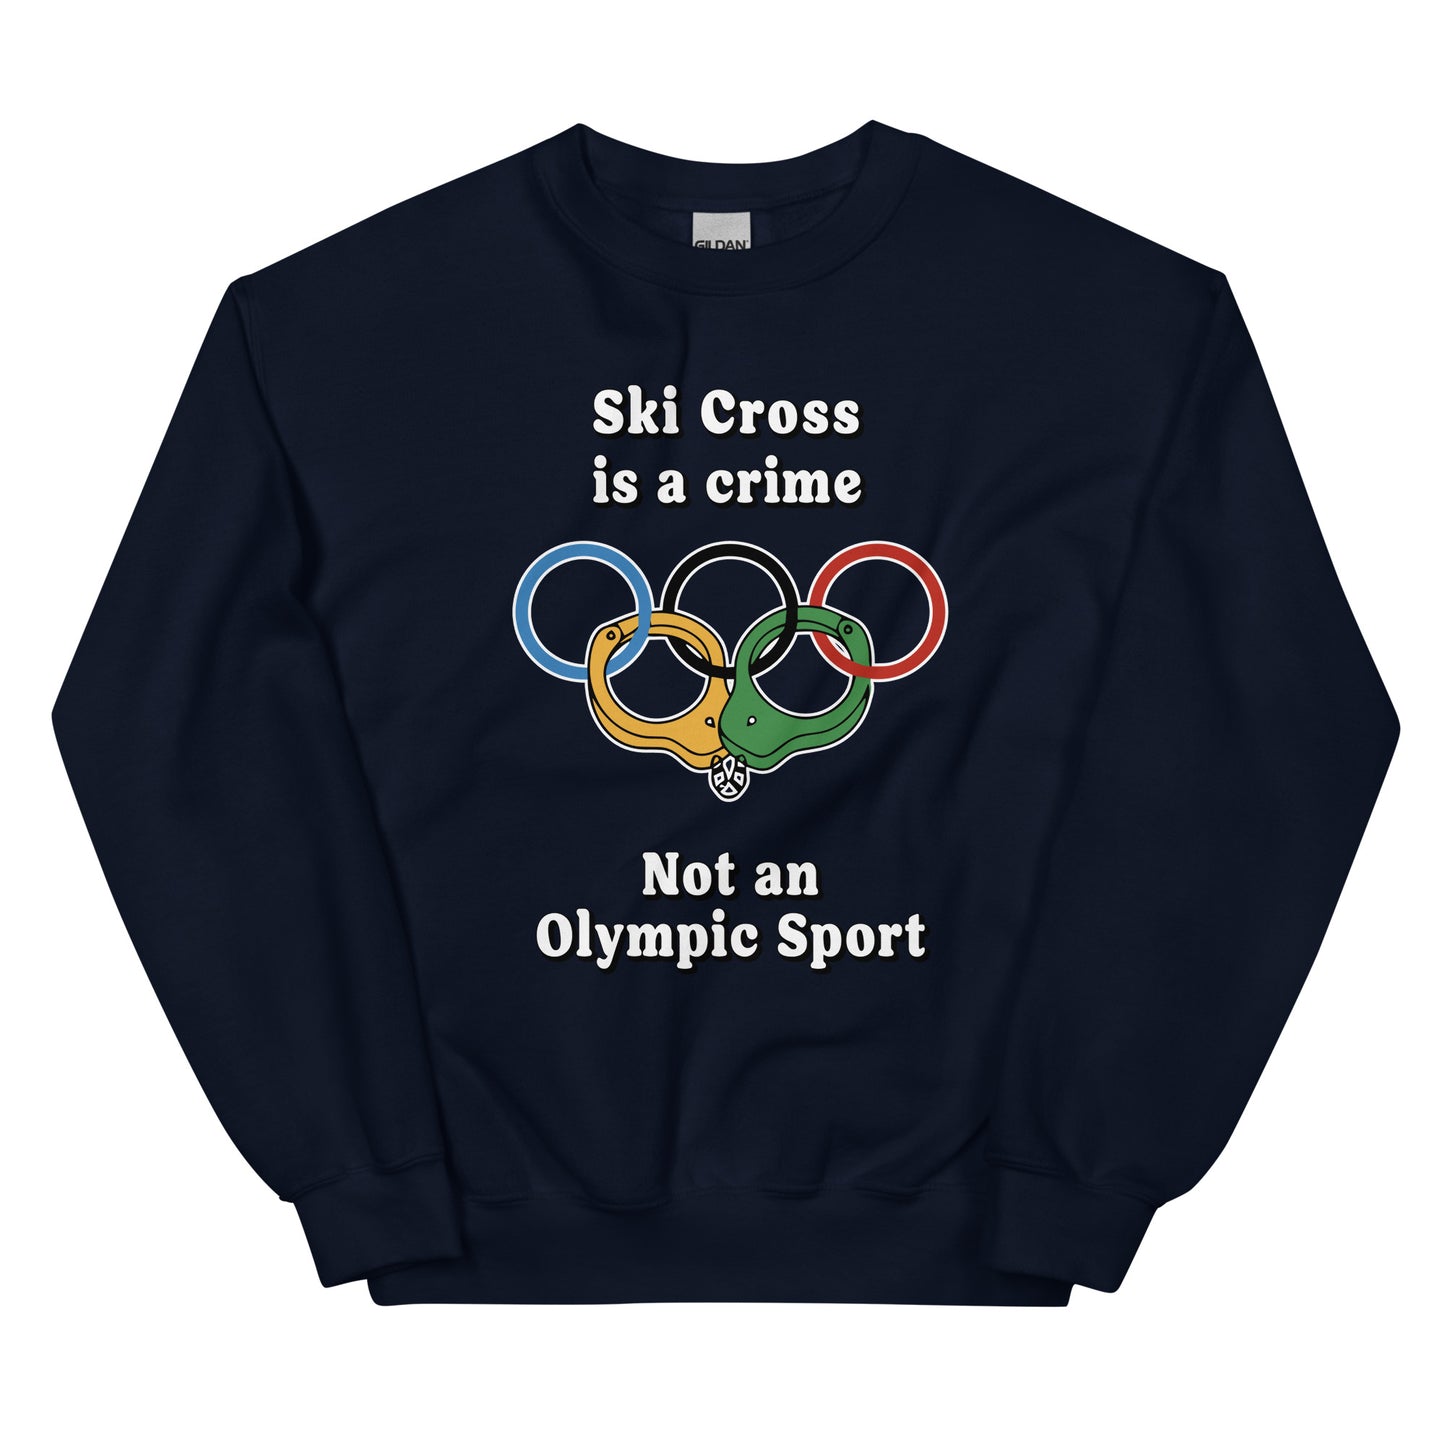 Ski Cross is a crime not an olympic sport design printed on a crewneck sweatshirt by Whistler Shirts